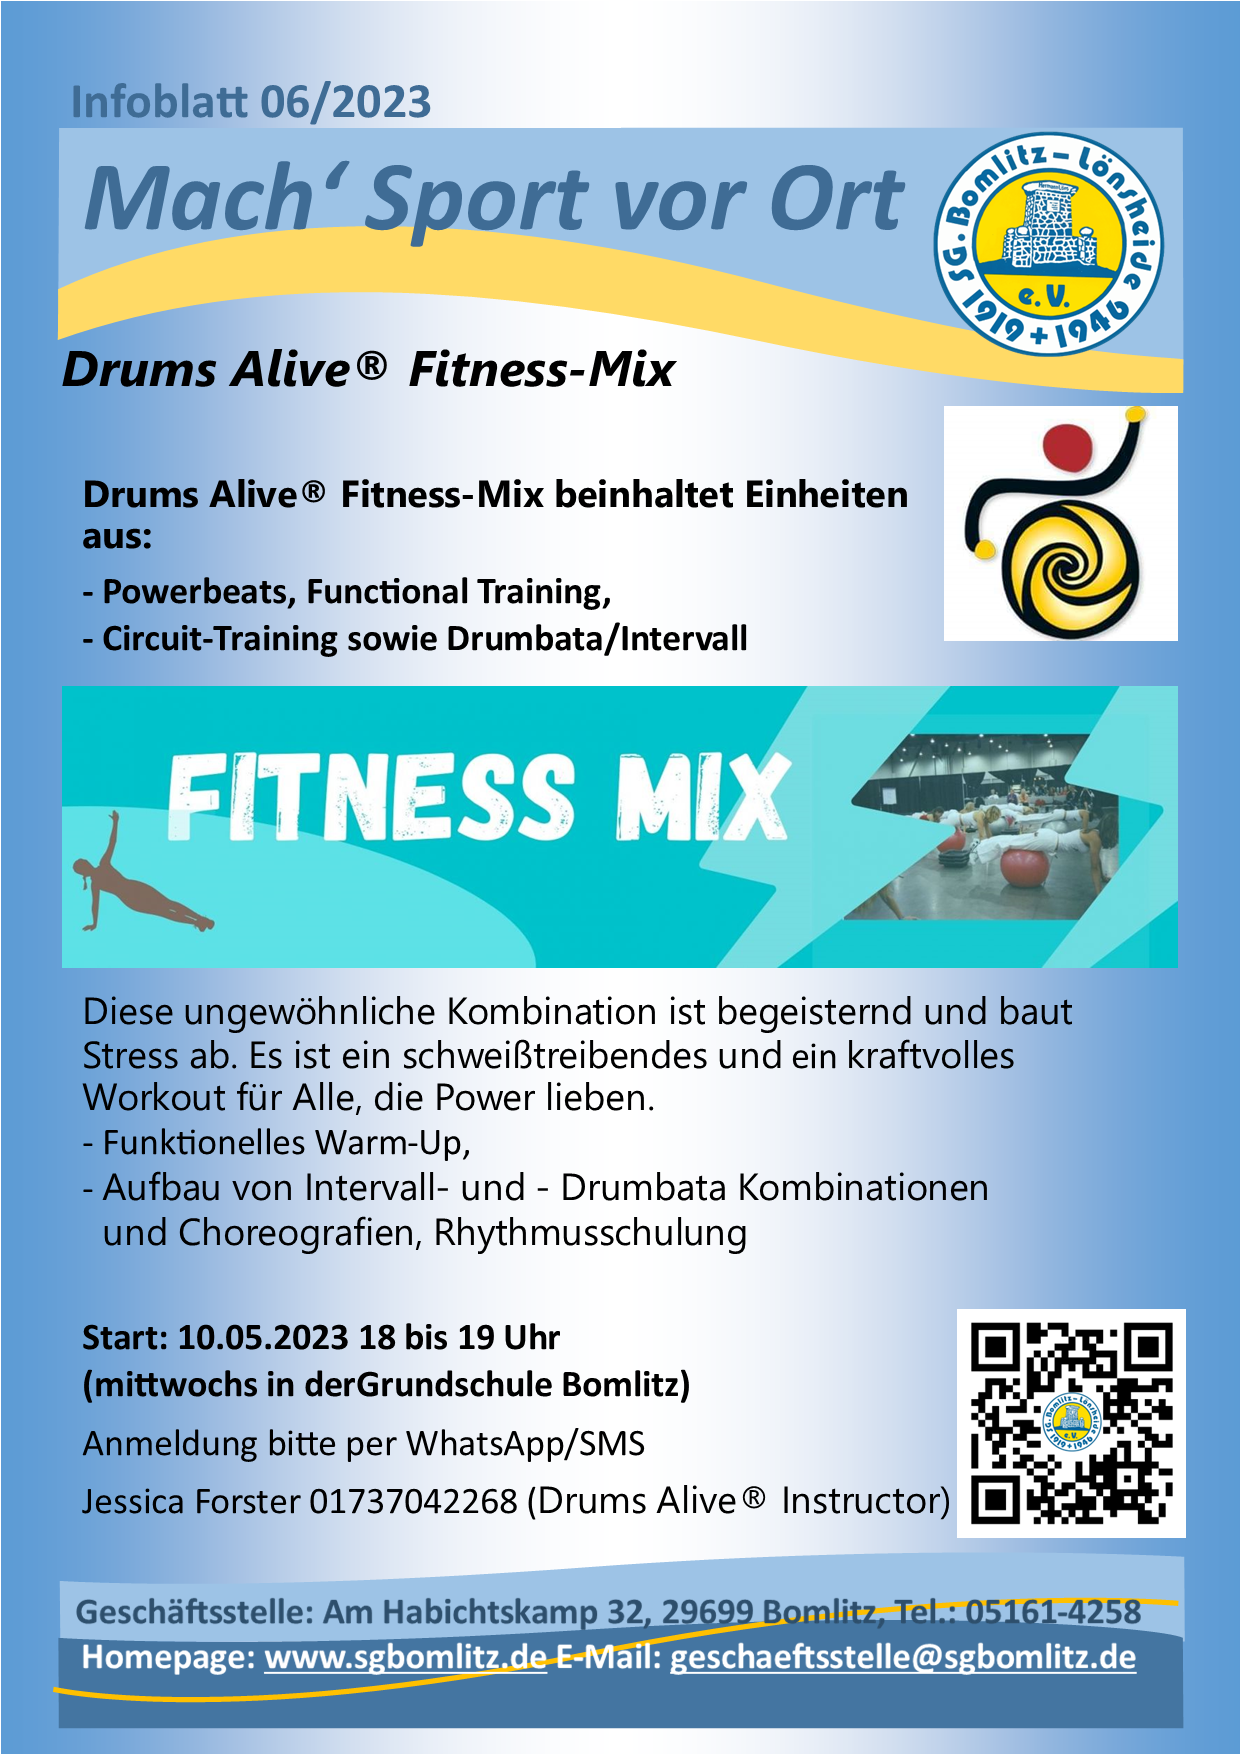 Drums Alive Fitness Mix